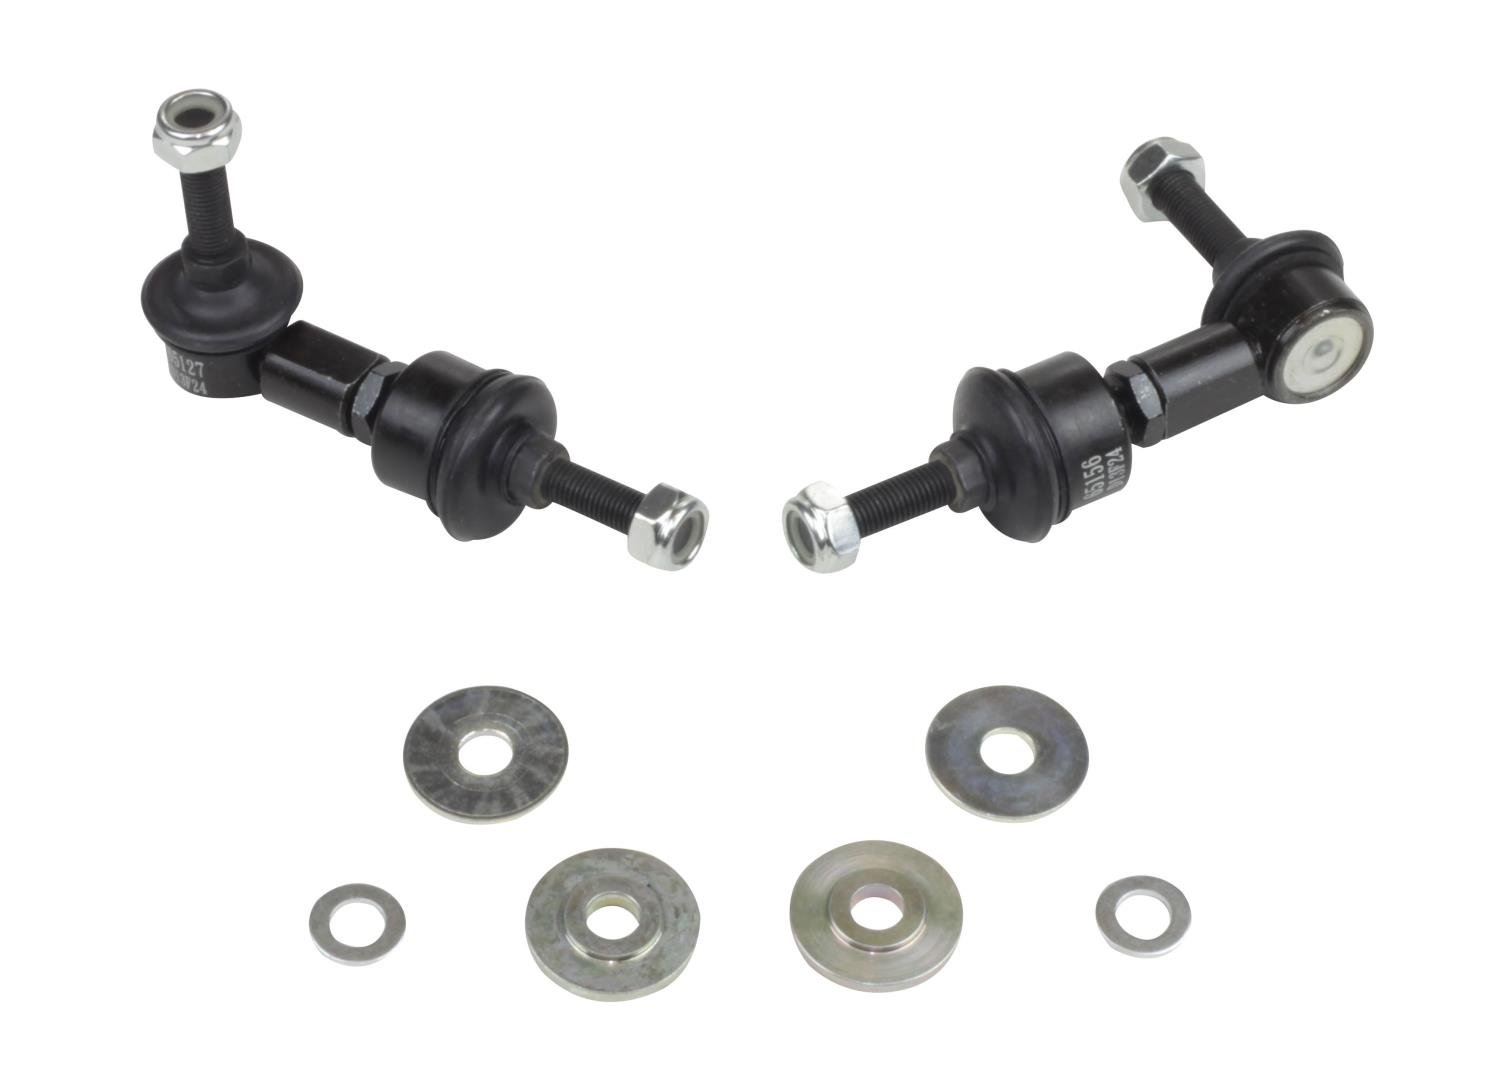 KLC109 Rear Sway Bar Link Kit-Adjustable Ball End Links for 1989-1998 Nissan 240SX S13 and S14